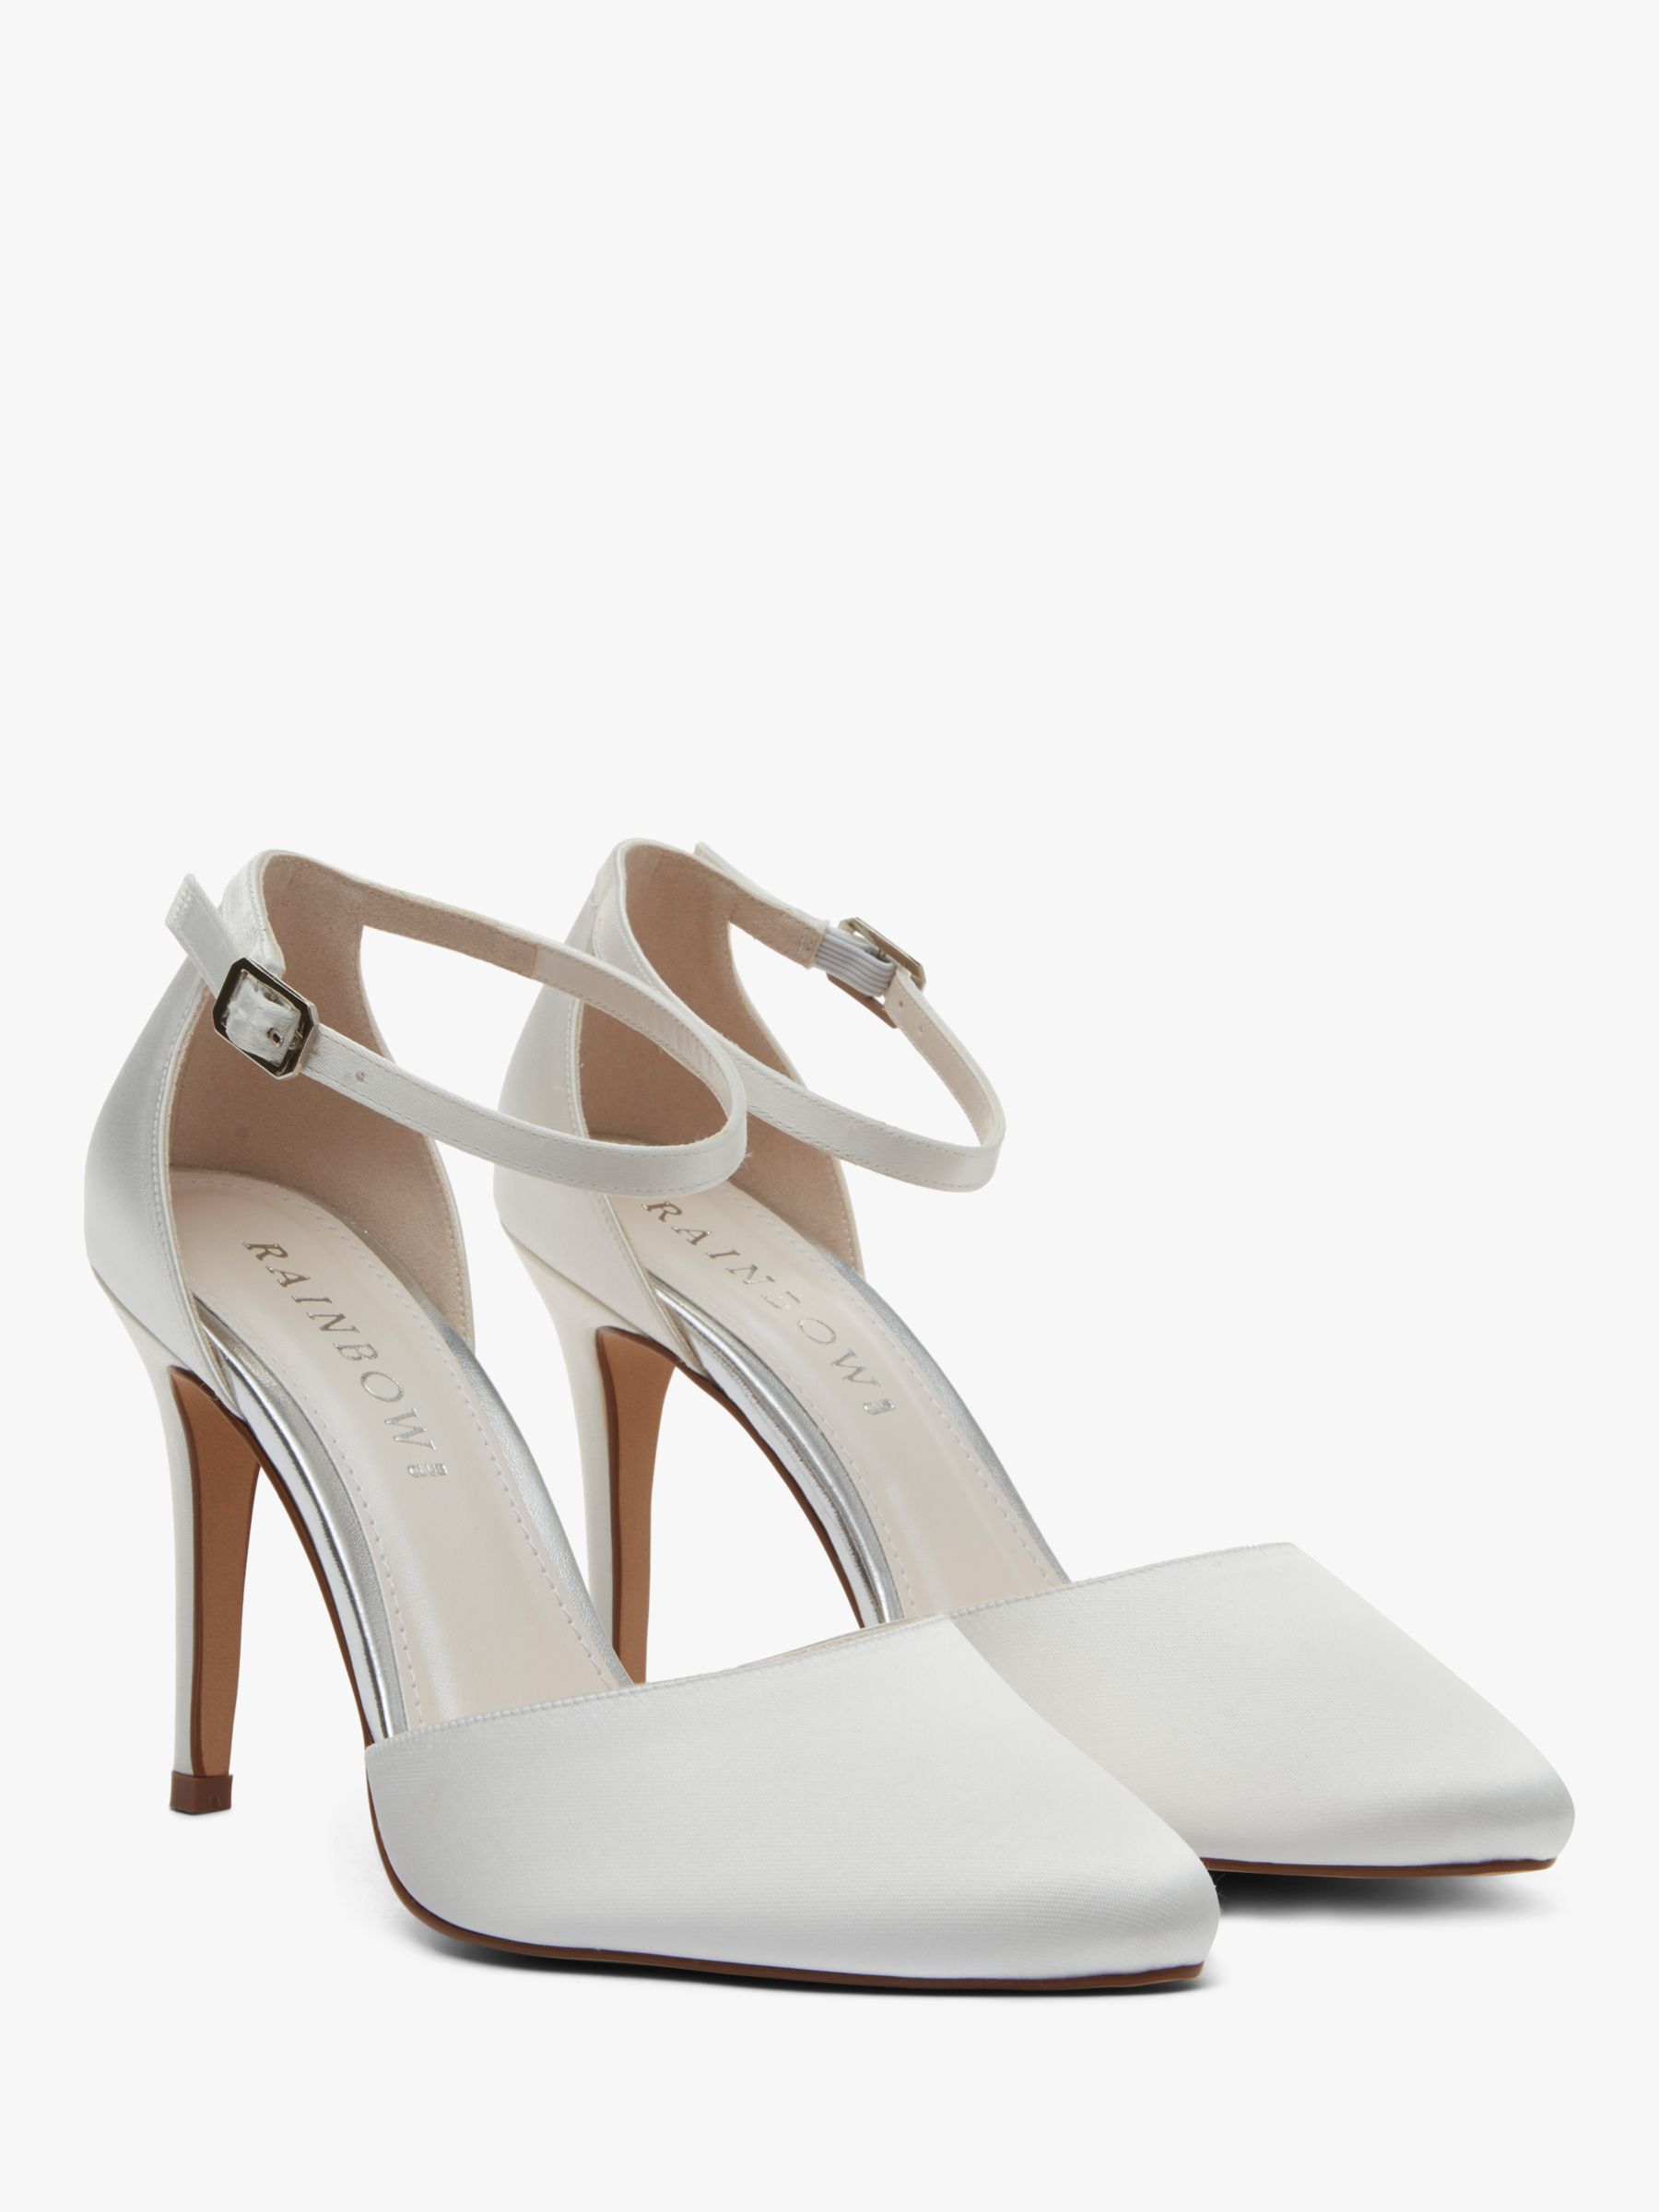 Rainbow Club Carly Court Shoes, Ivory, 6.5